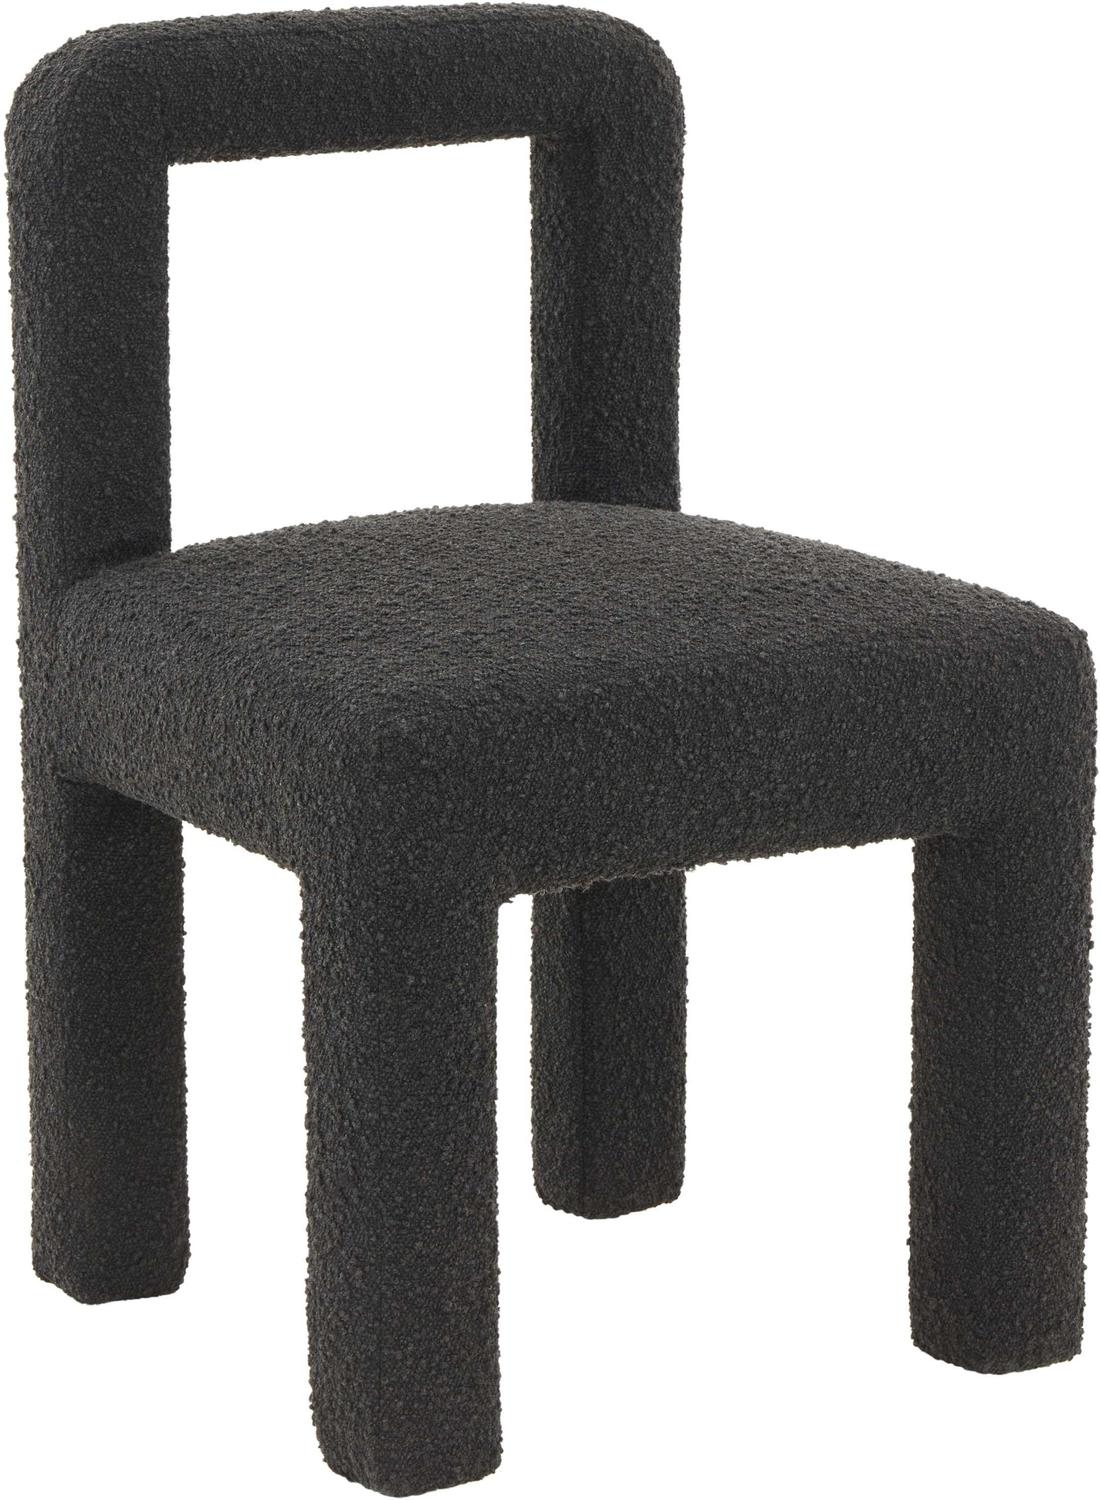 mcm upholstered dining chair Contemporary Design Furniture Dining Chairs Black